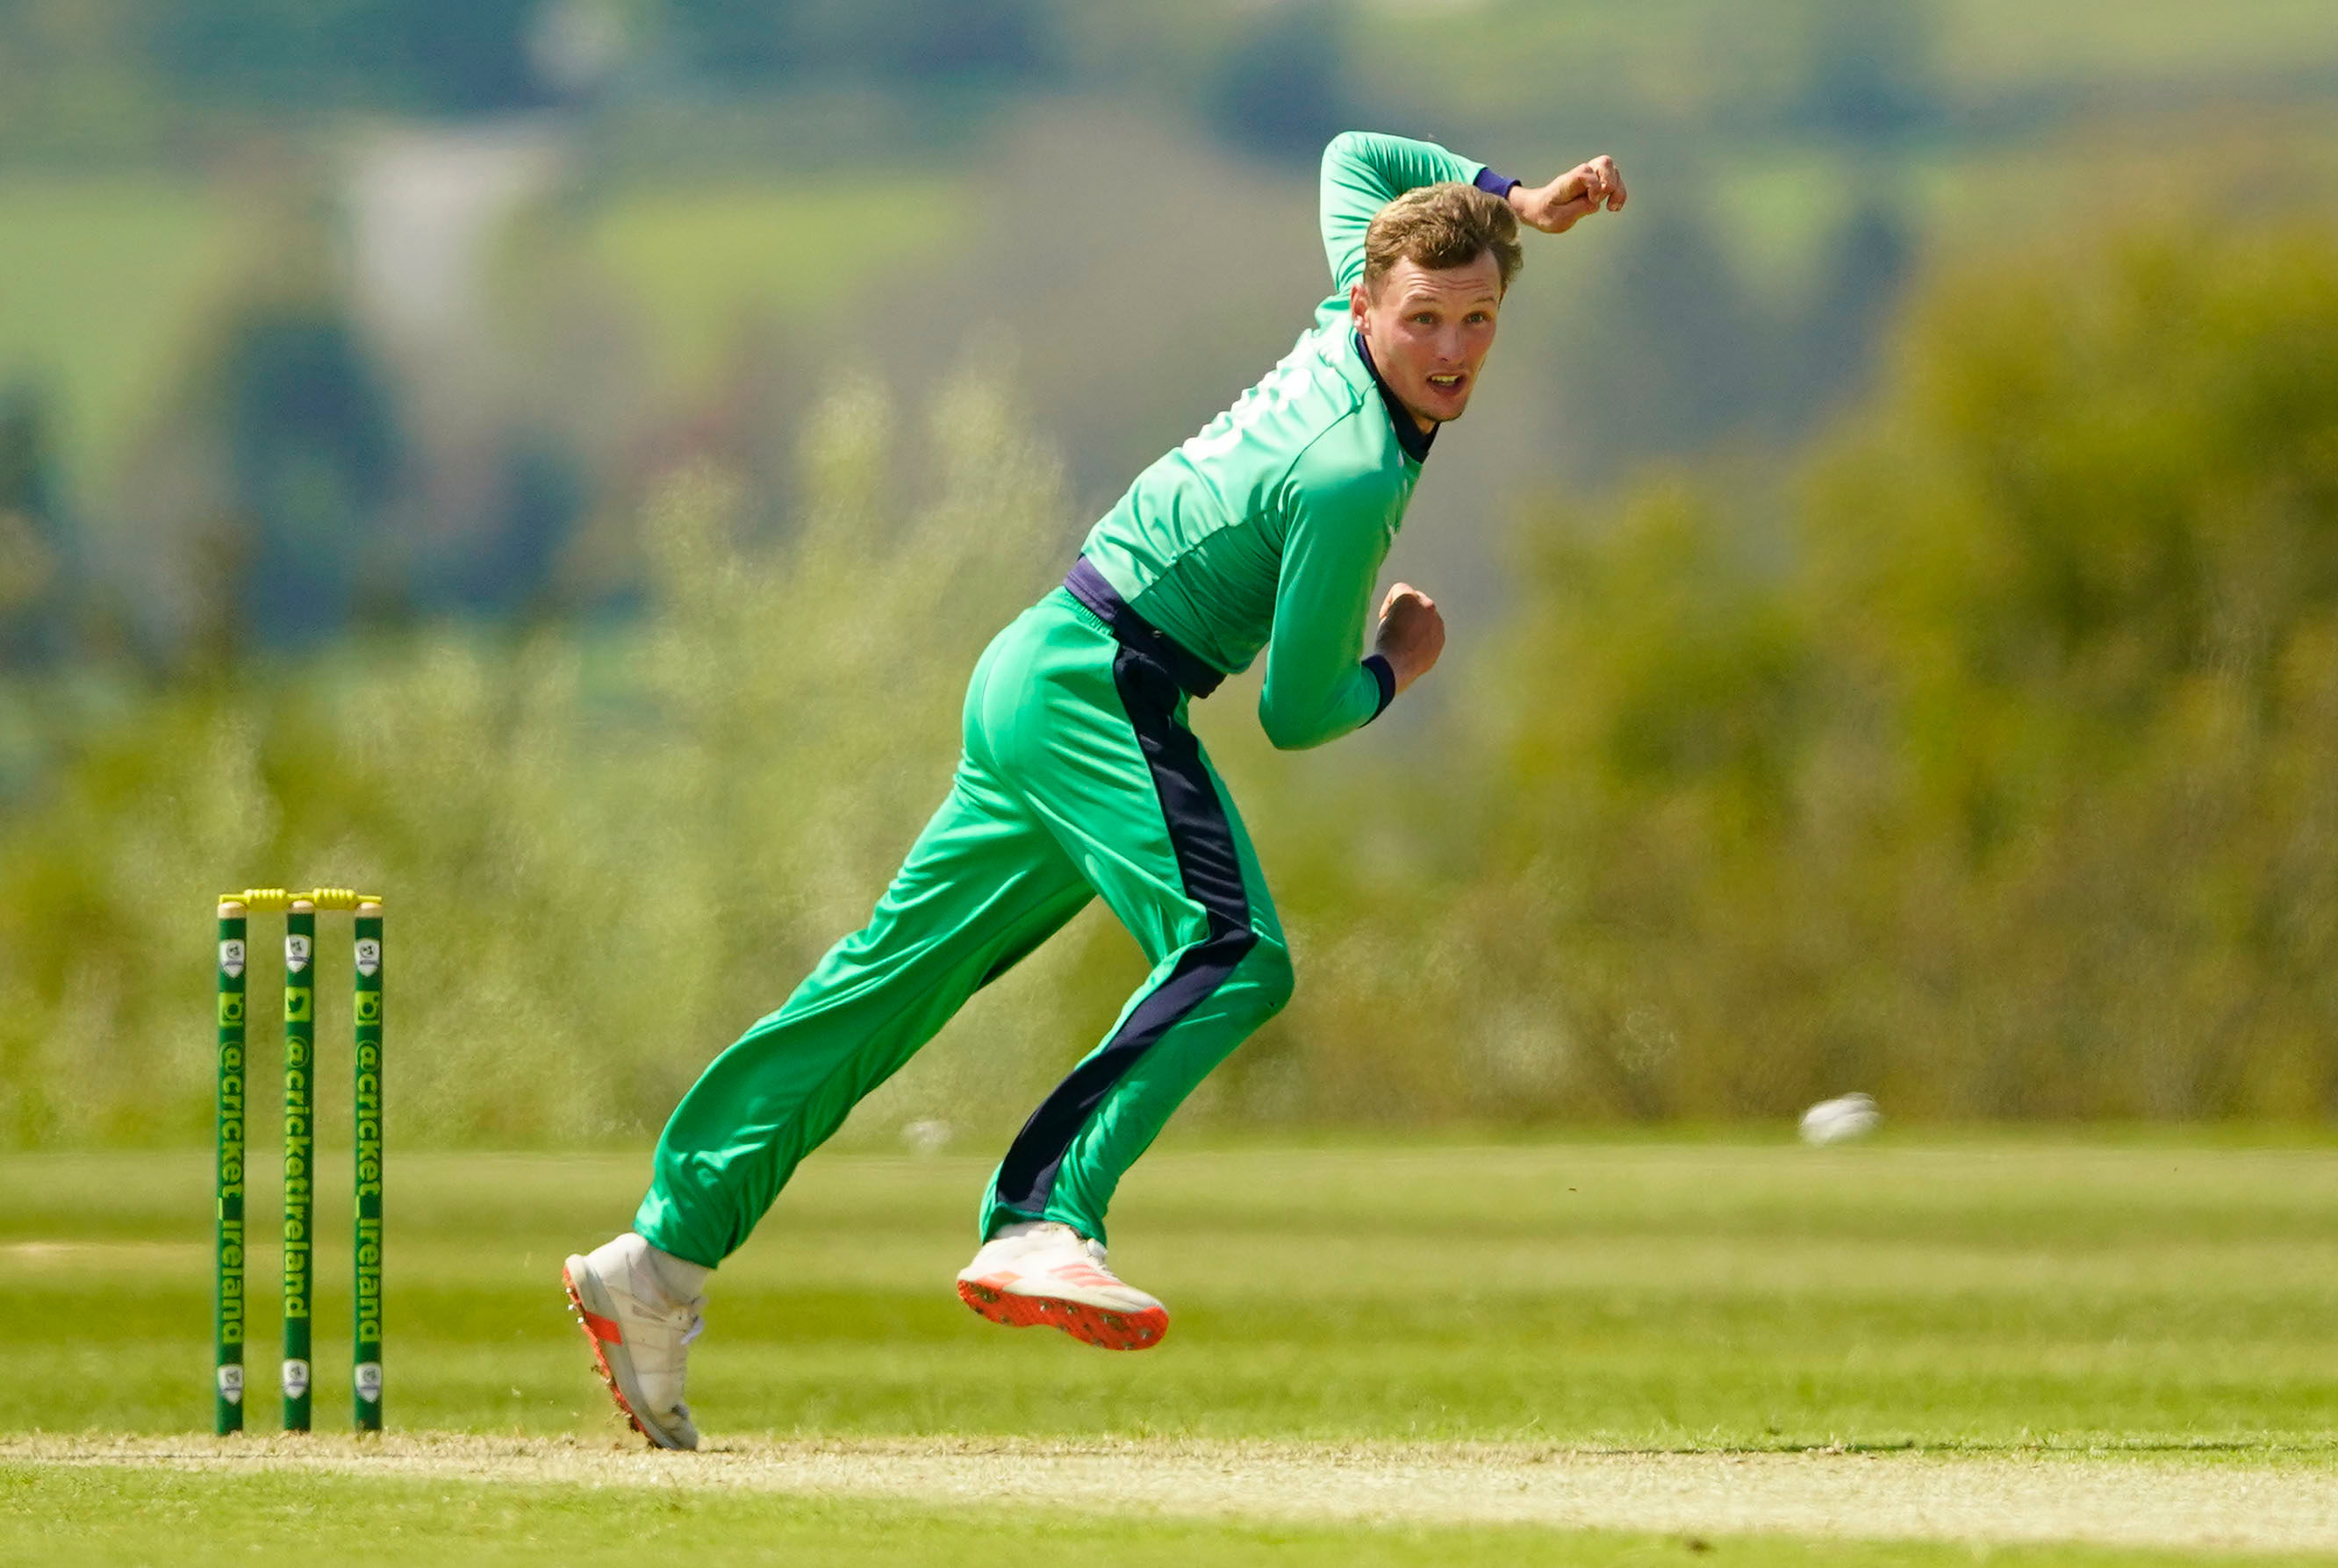 Cricket Ireland: Gareth Delany withdraws from upcoming tour due to injury, Ben White called up